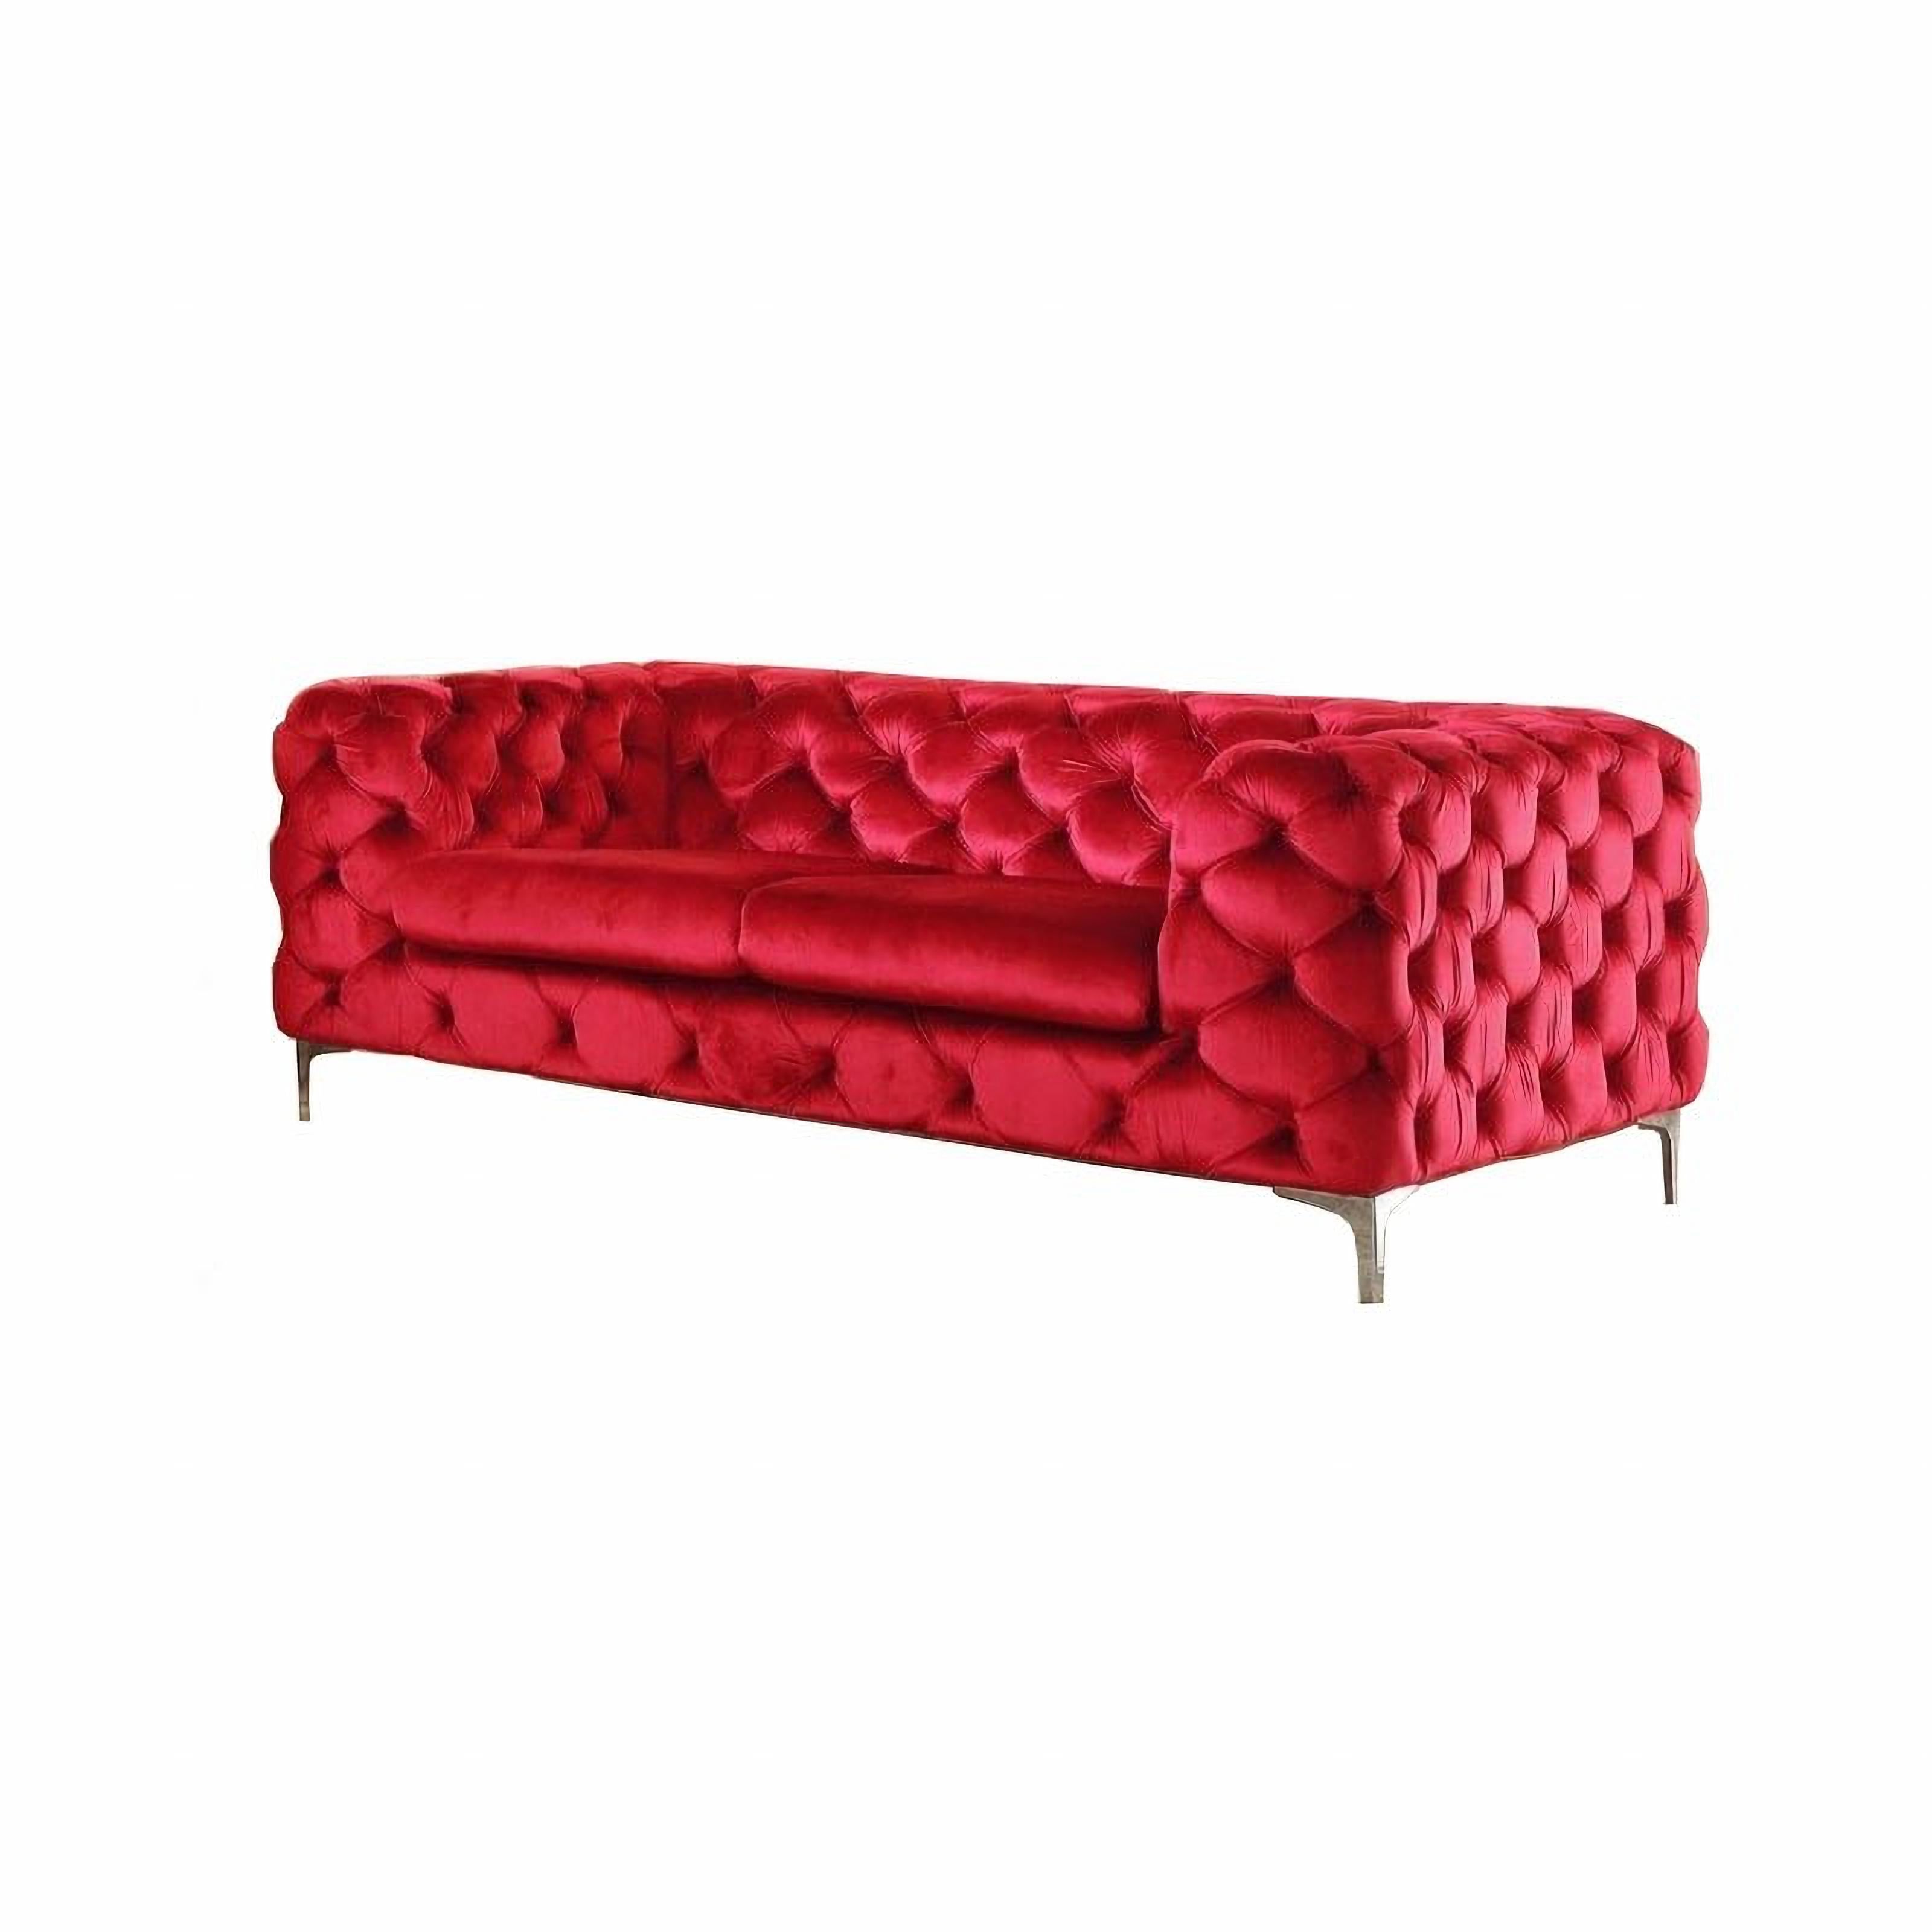 Hand-Crafted Chester 2 Seater Sofa, Red Wine Velvet New For Sale